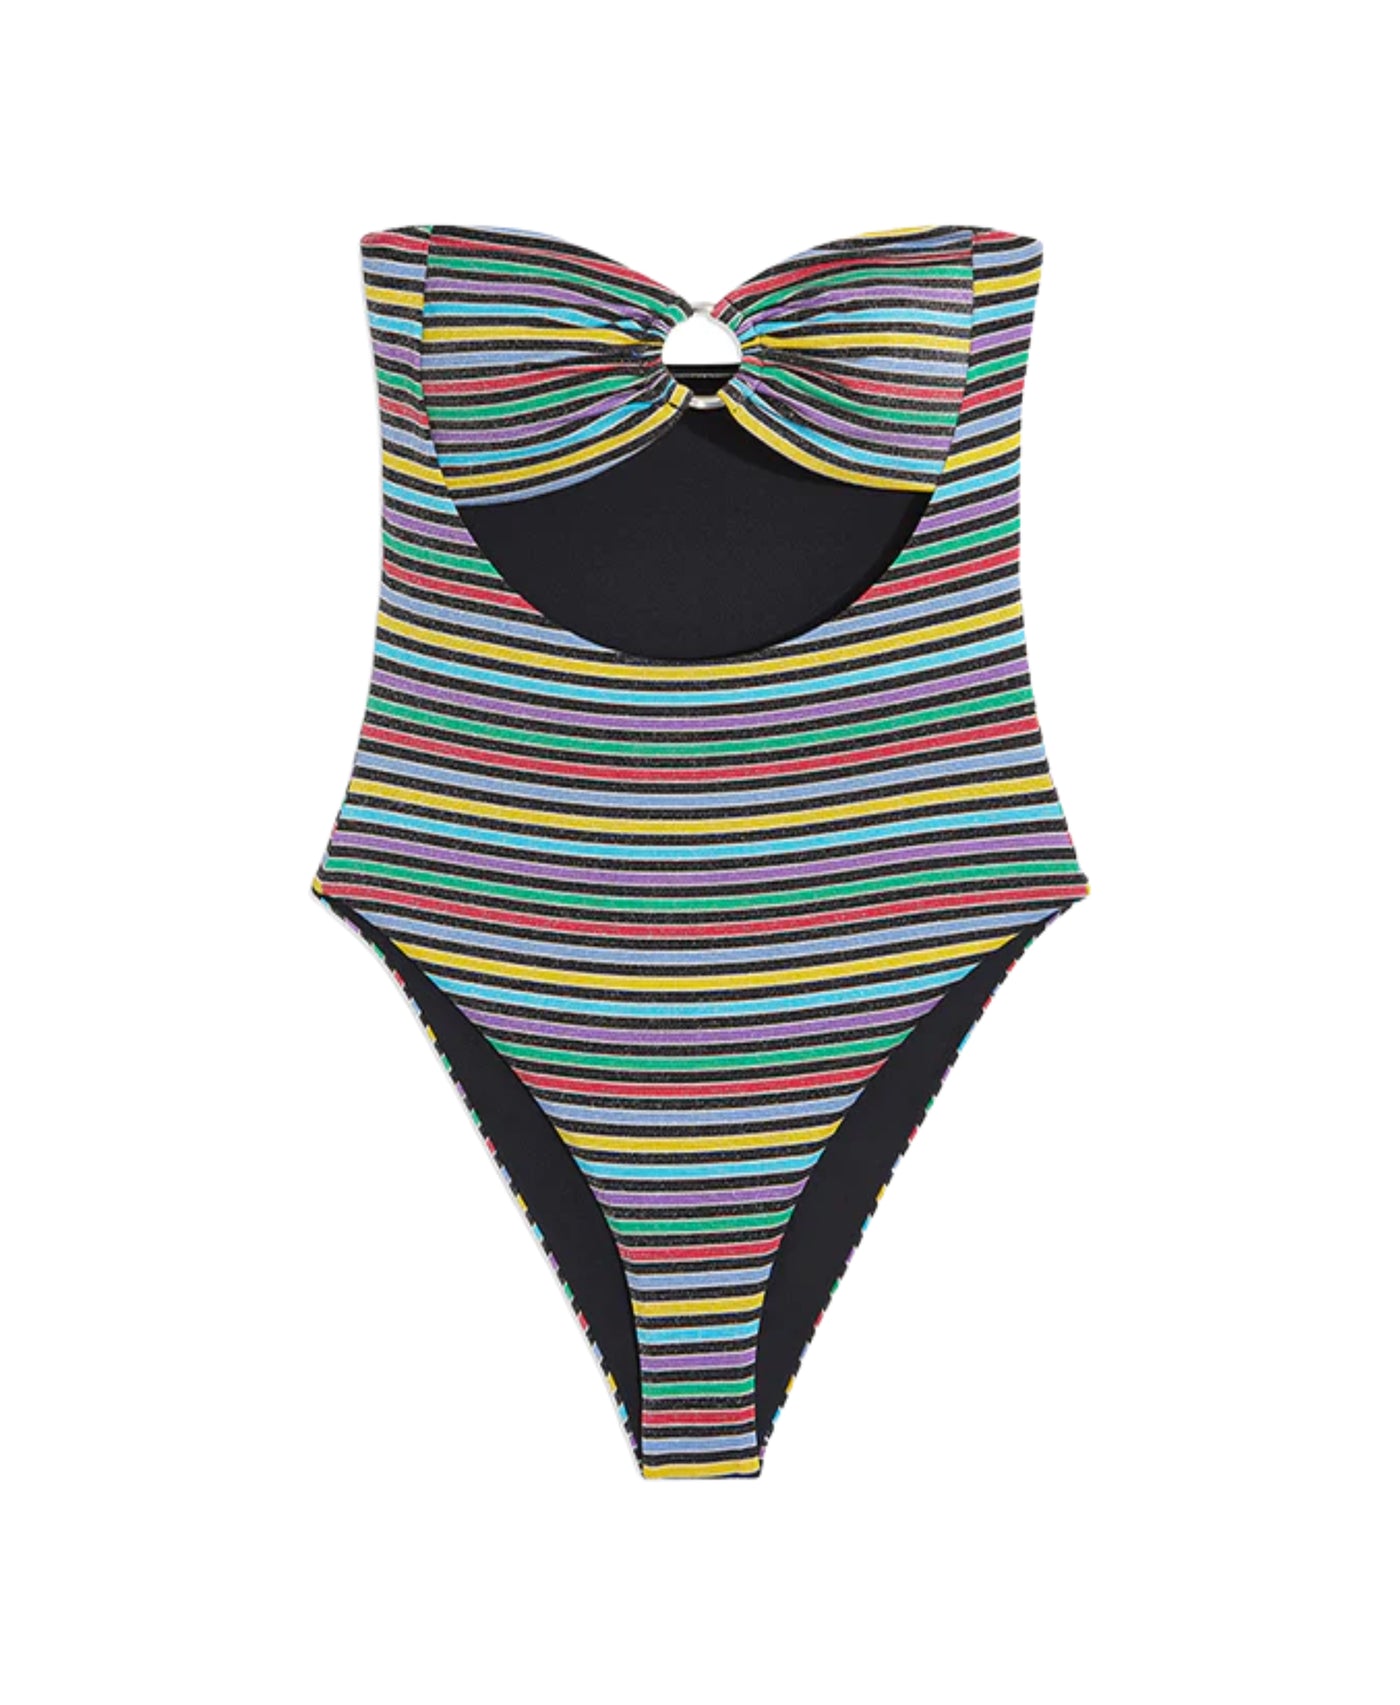 Shimmer Stripe Bandeau One-Piece Swimsuit image 1